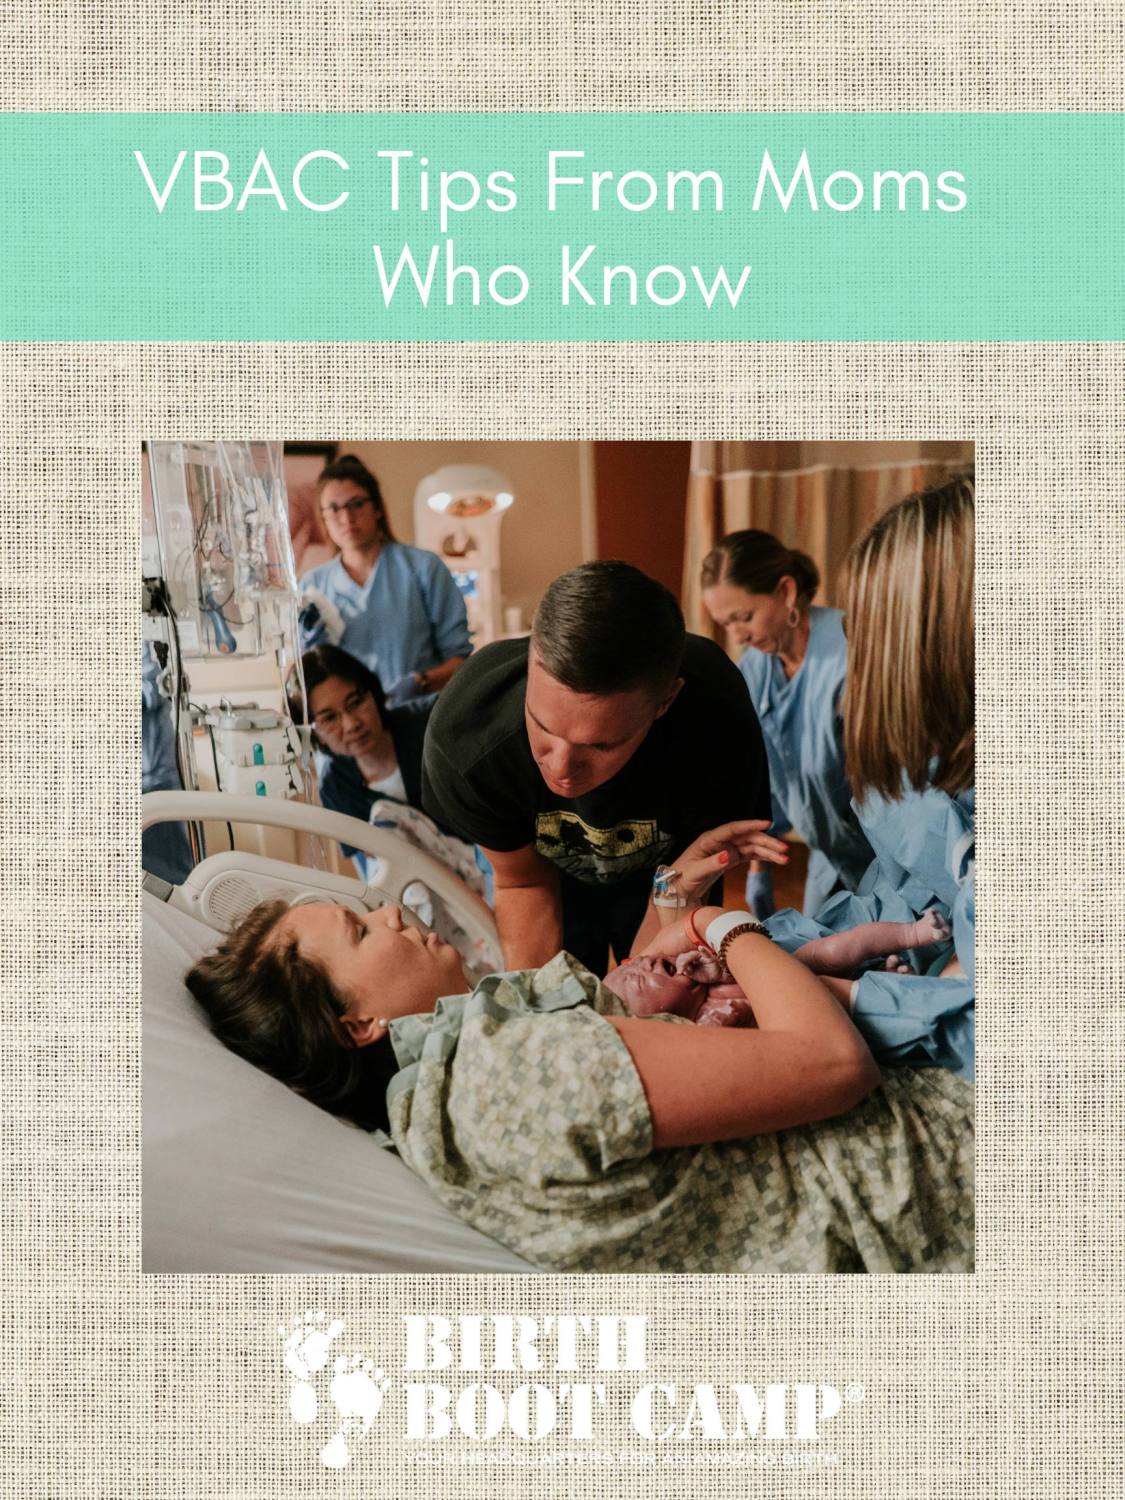 VBAC Tips From Moms Who Know